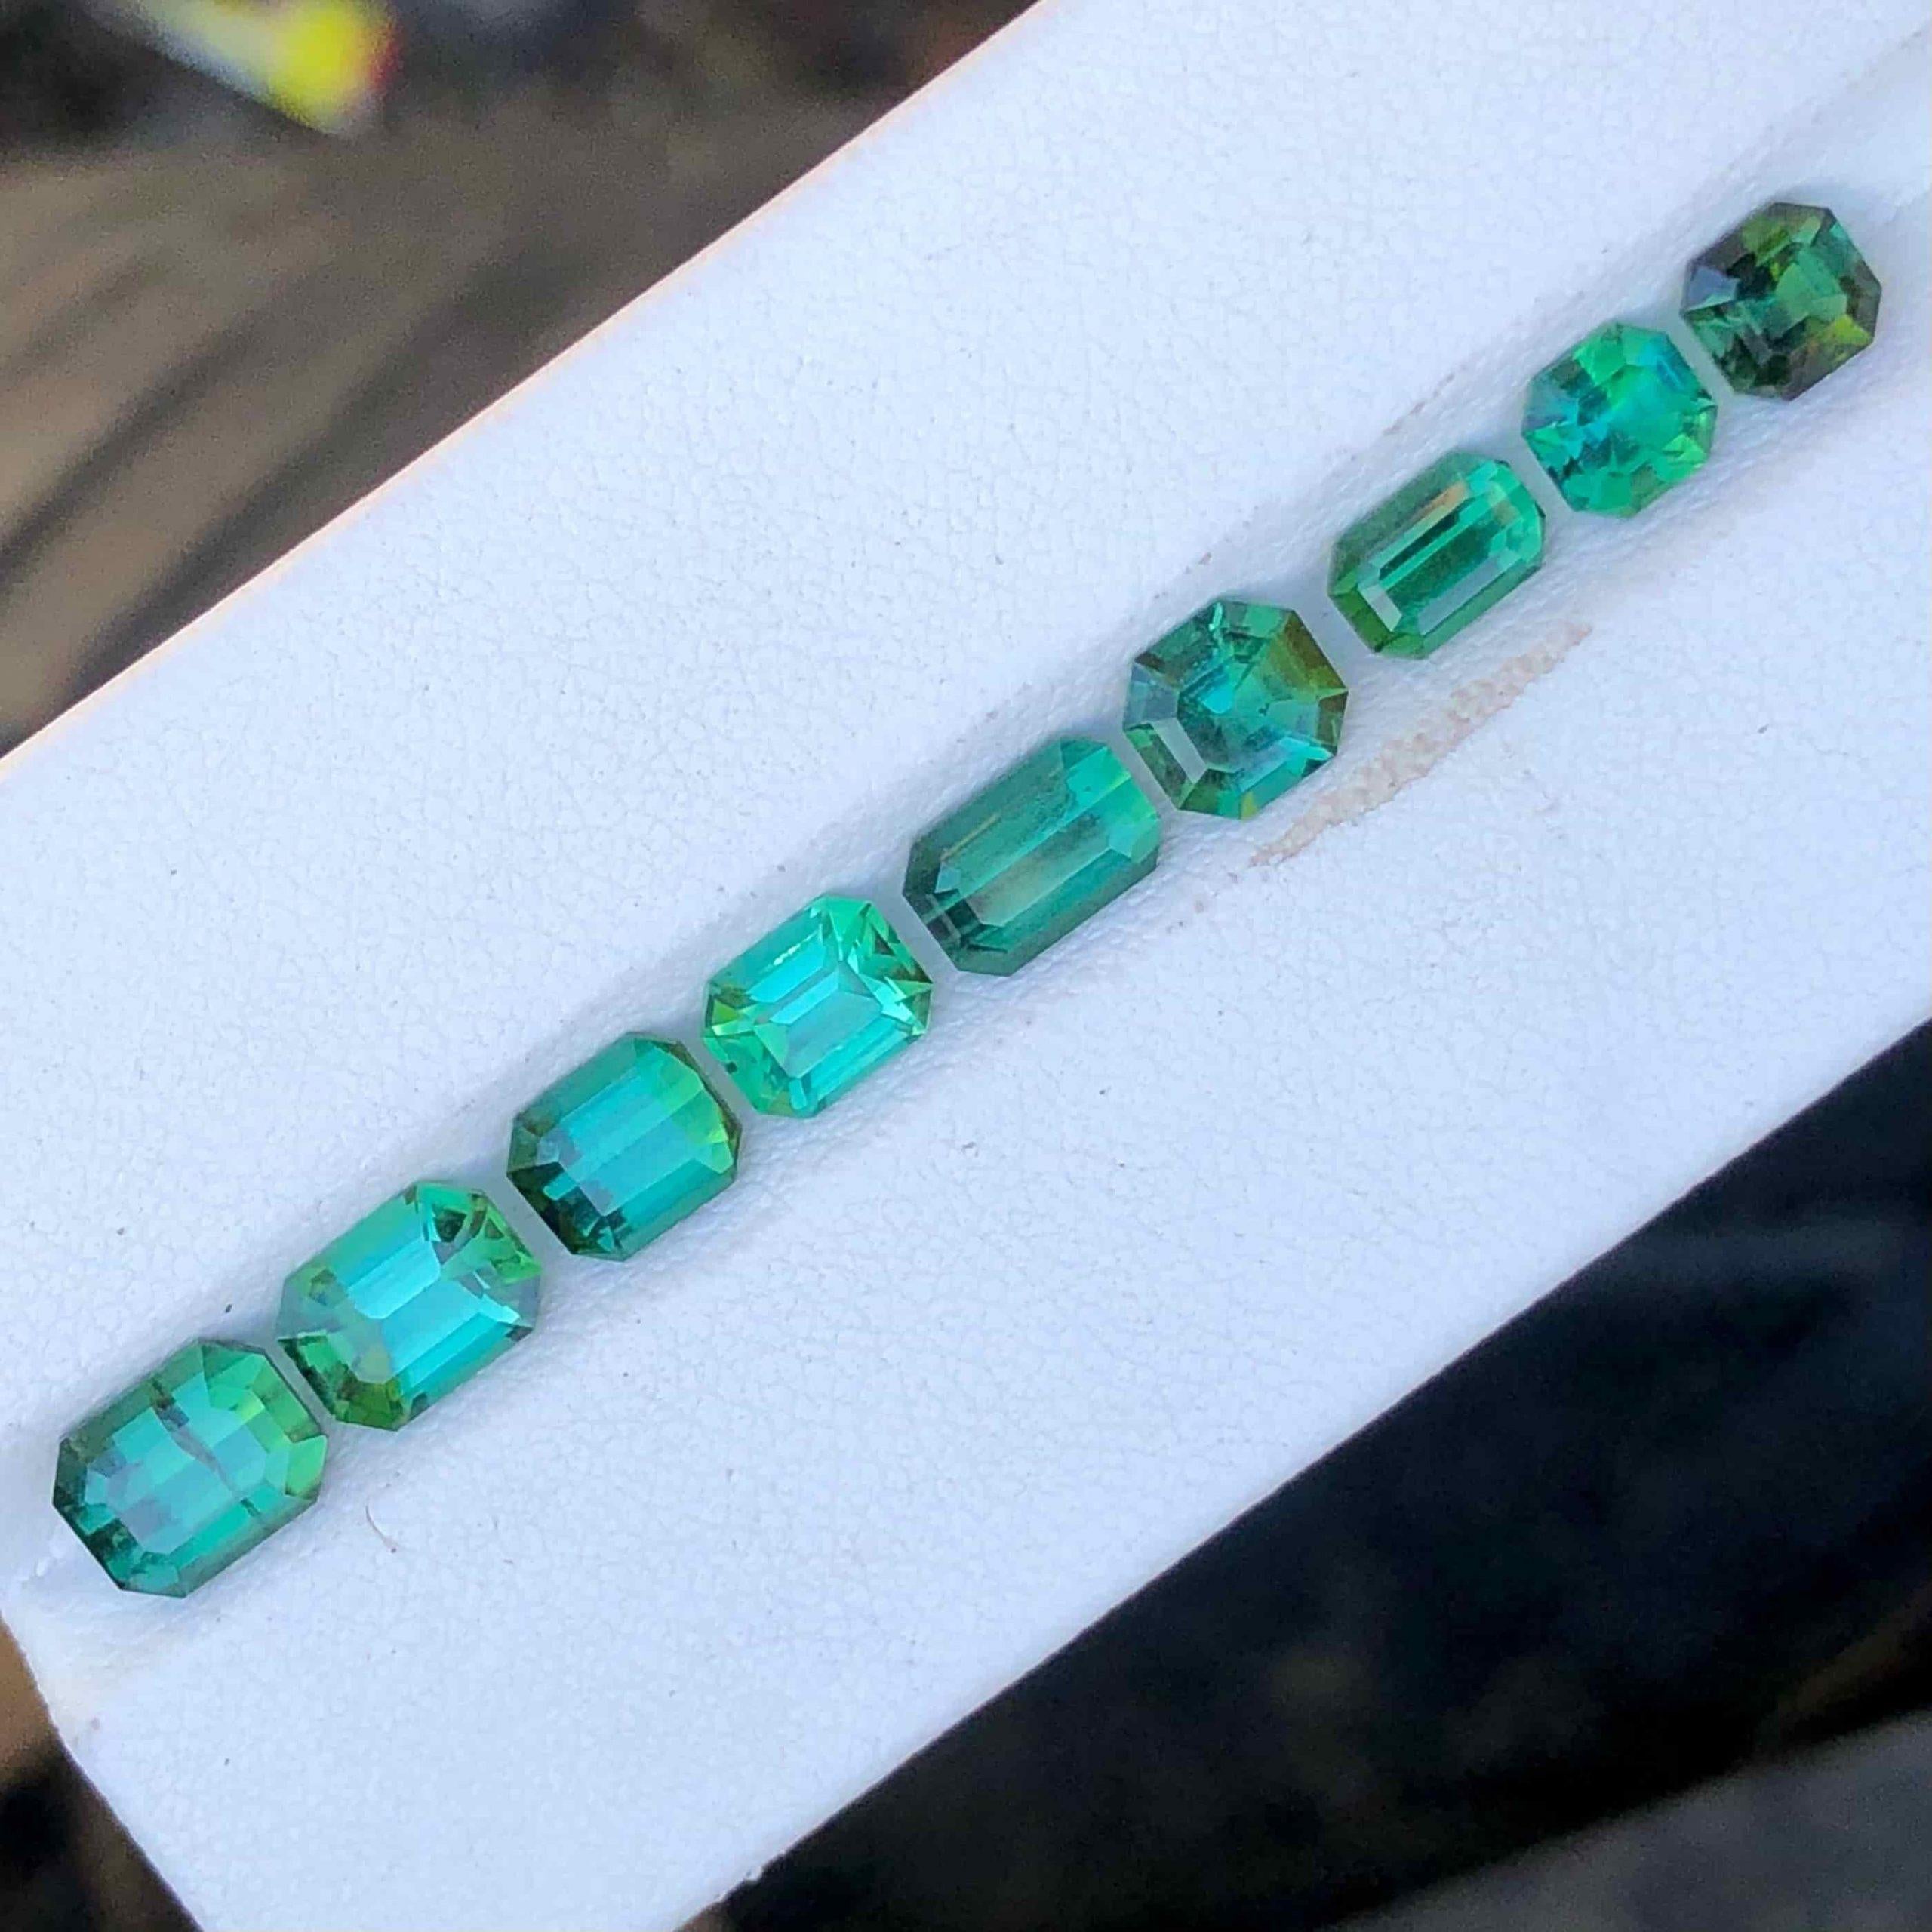 Mixed Cut Mint Green Tourmaline Gemstones Lot Natural Loose Tourmaline from Afghanistan For Sale